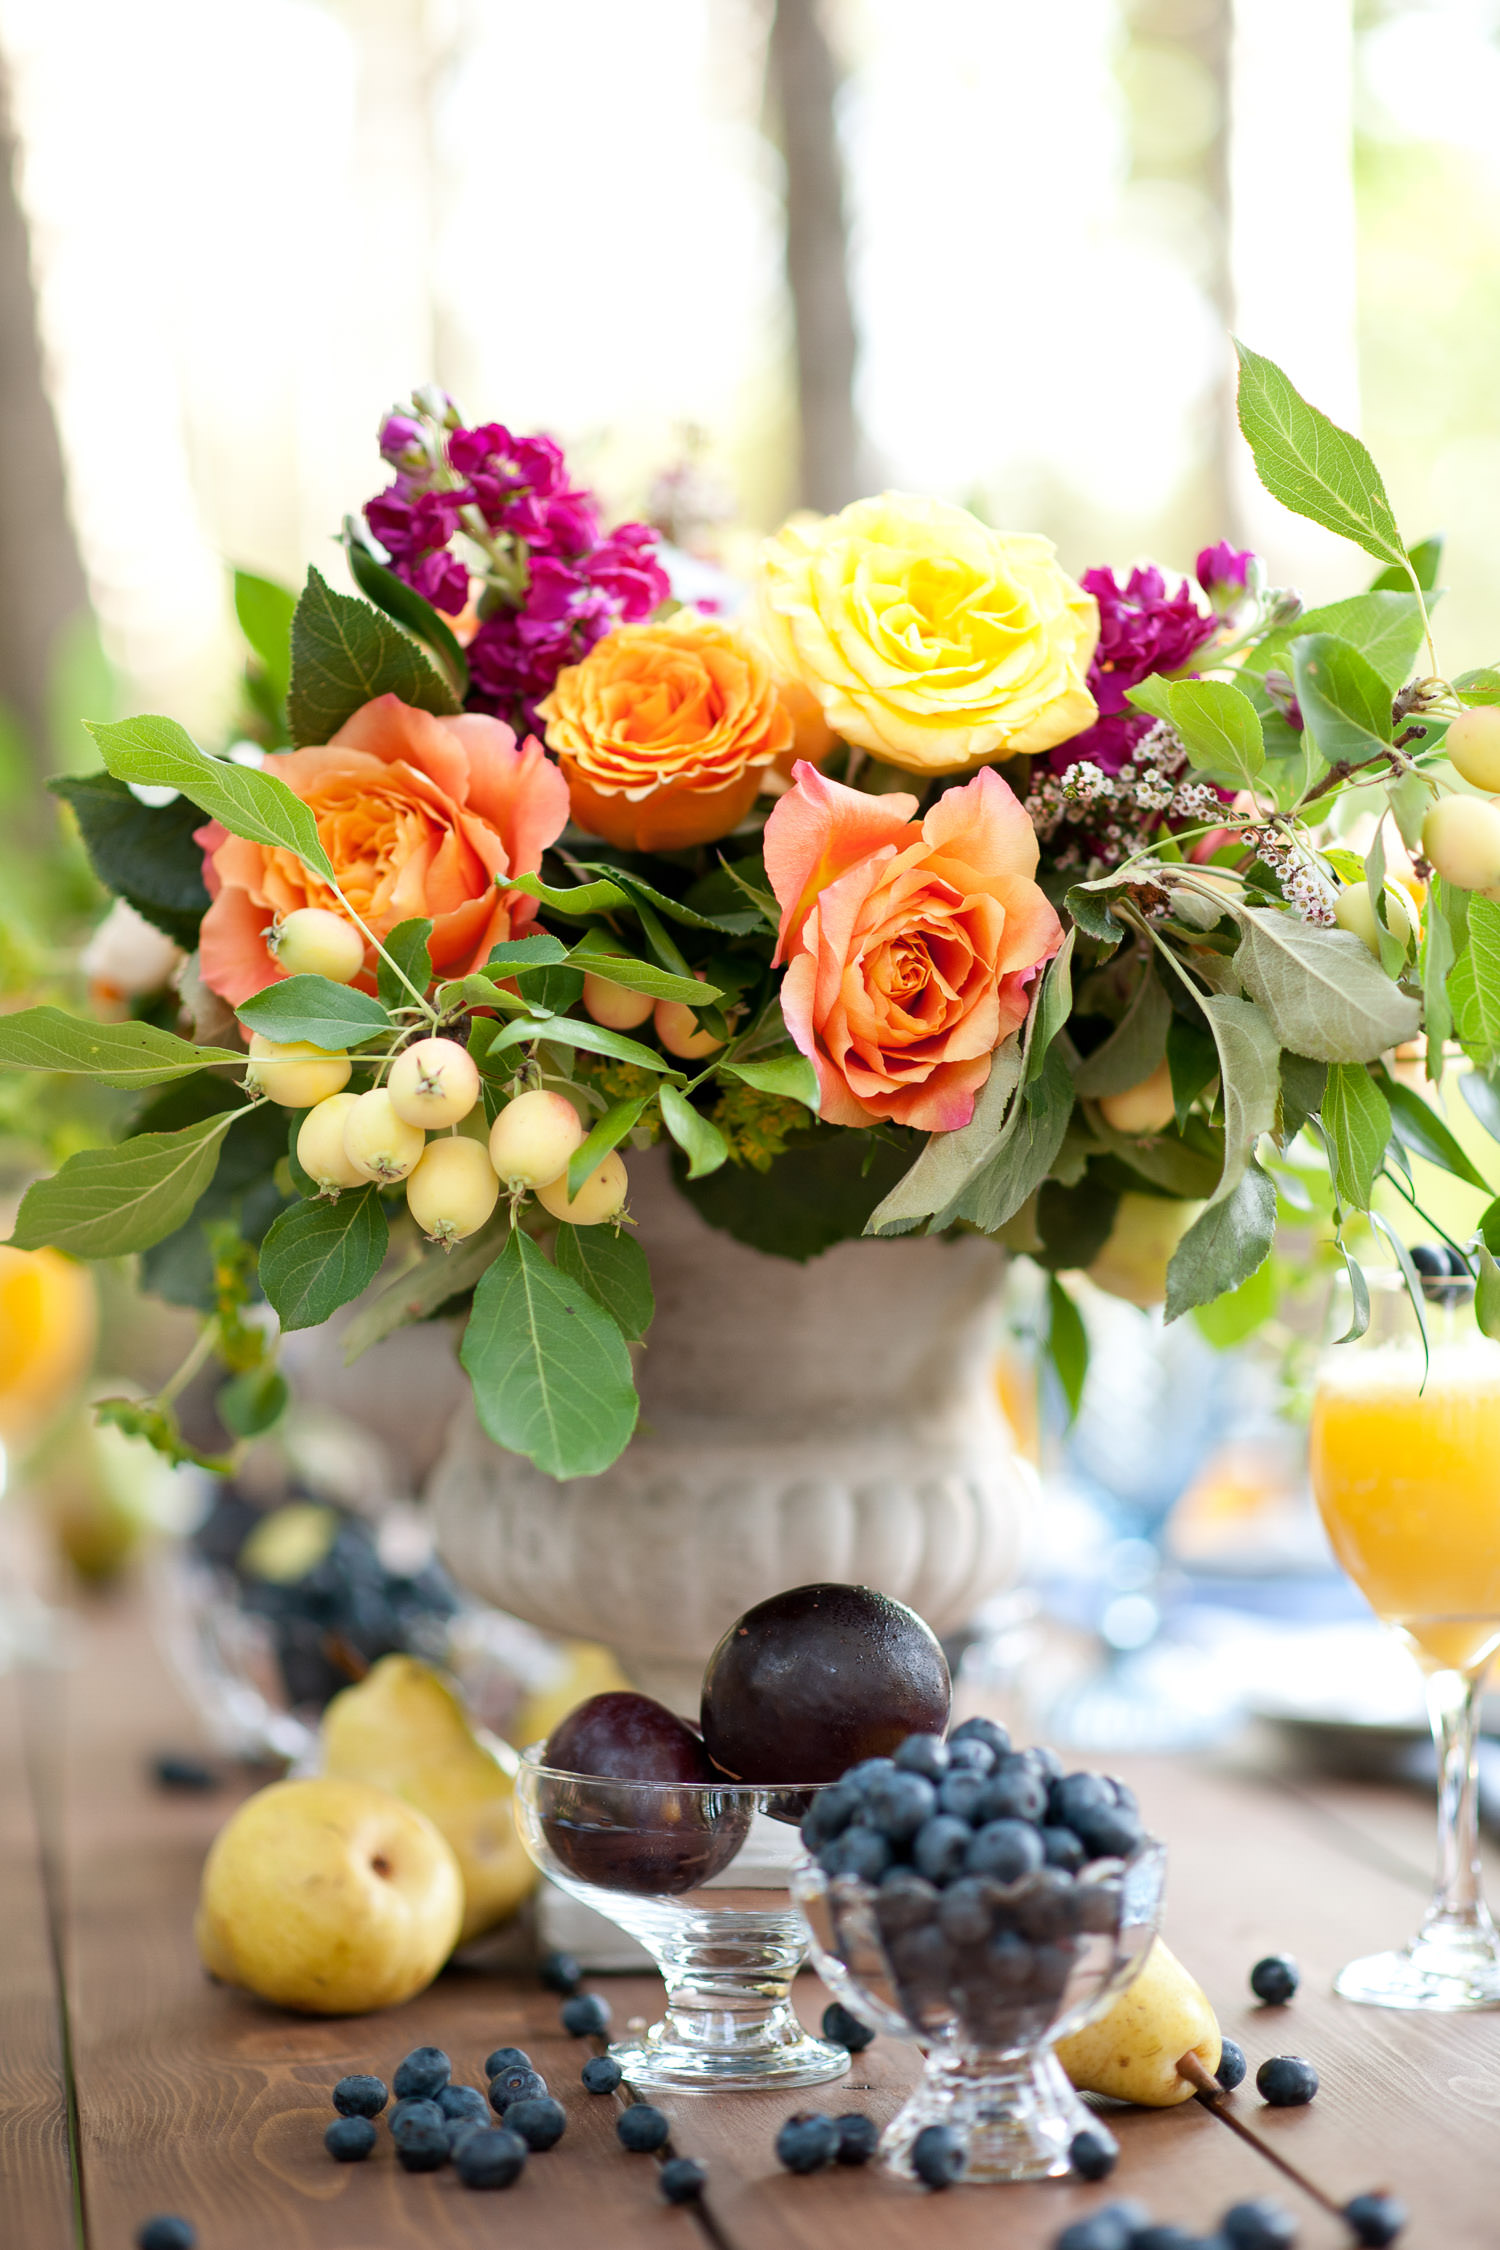 Plums, pears and blueberries on a brunch table captured by Tara Whittaker Photography